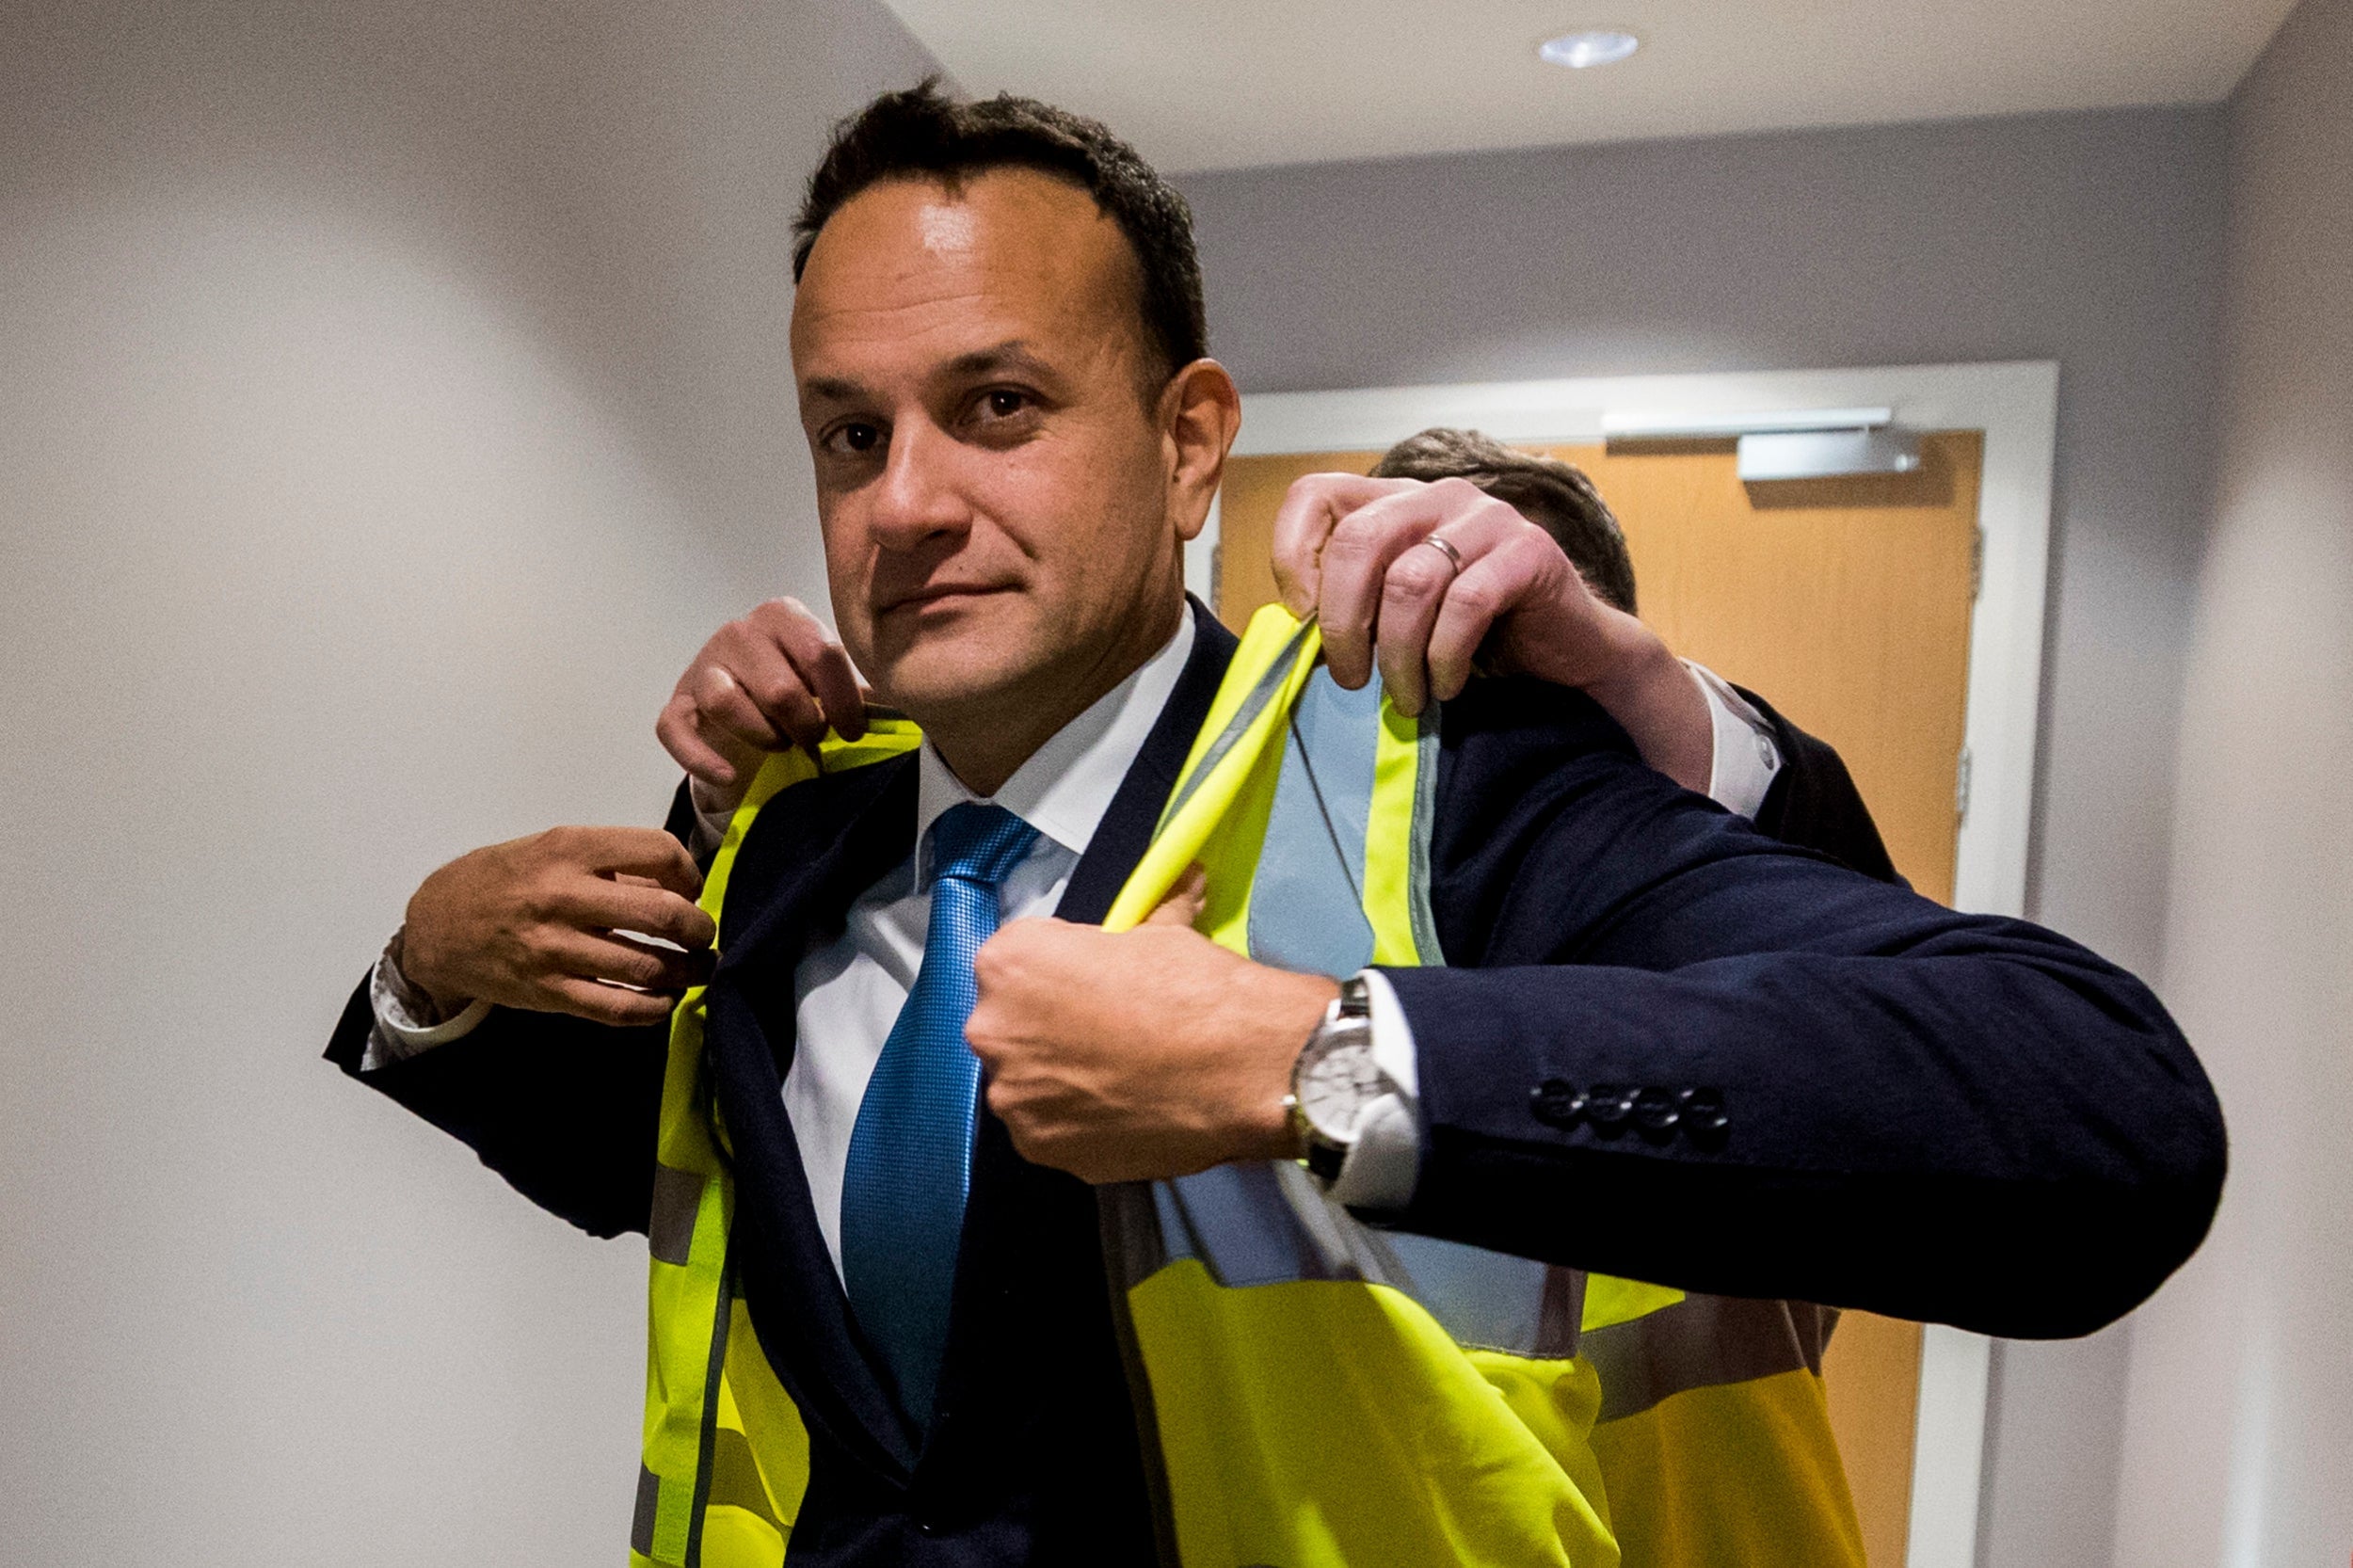 Leo Varadkar has said city council workers checked the tents for people before removing them but 'obviously something went wrong'